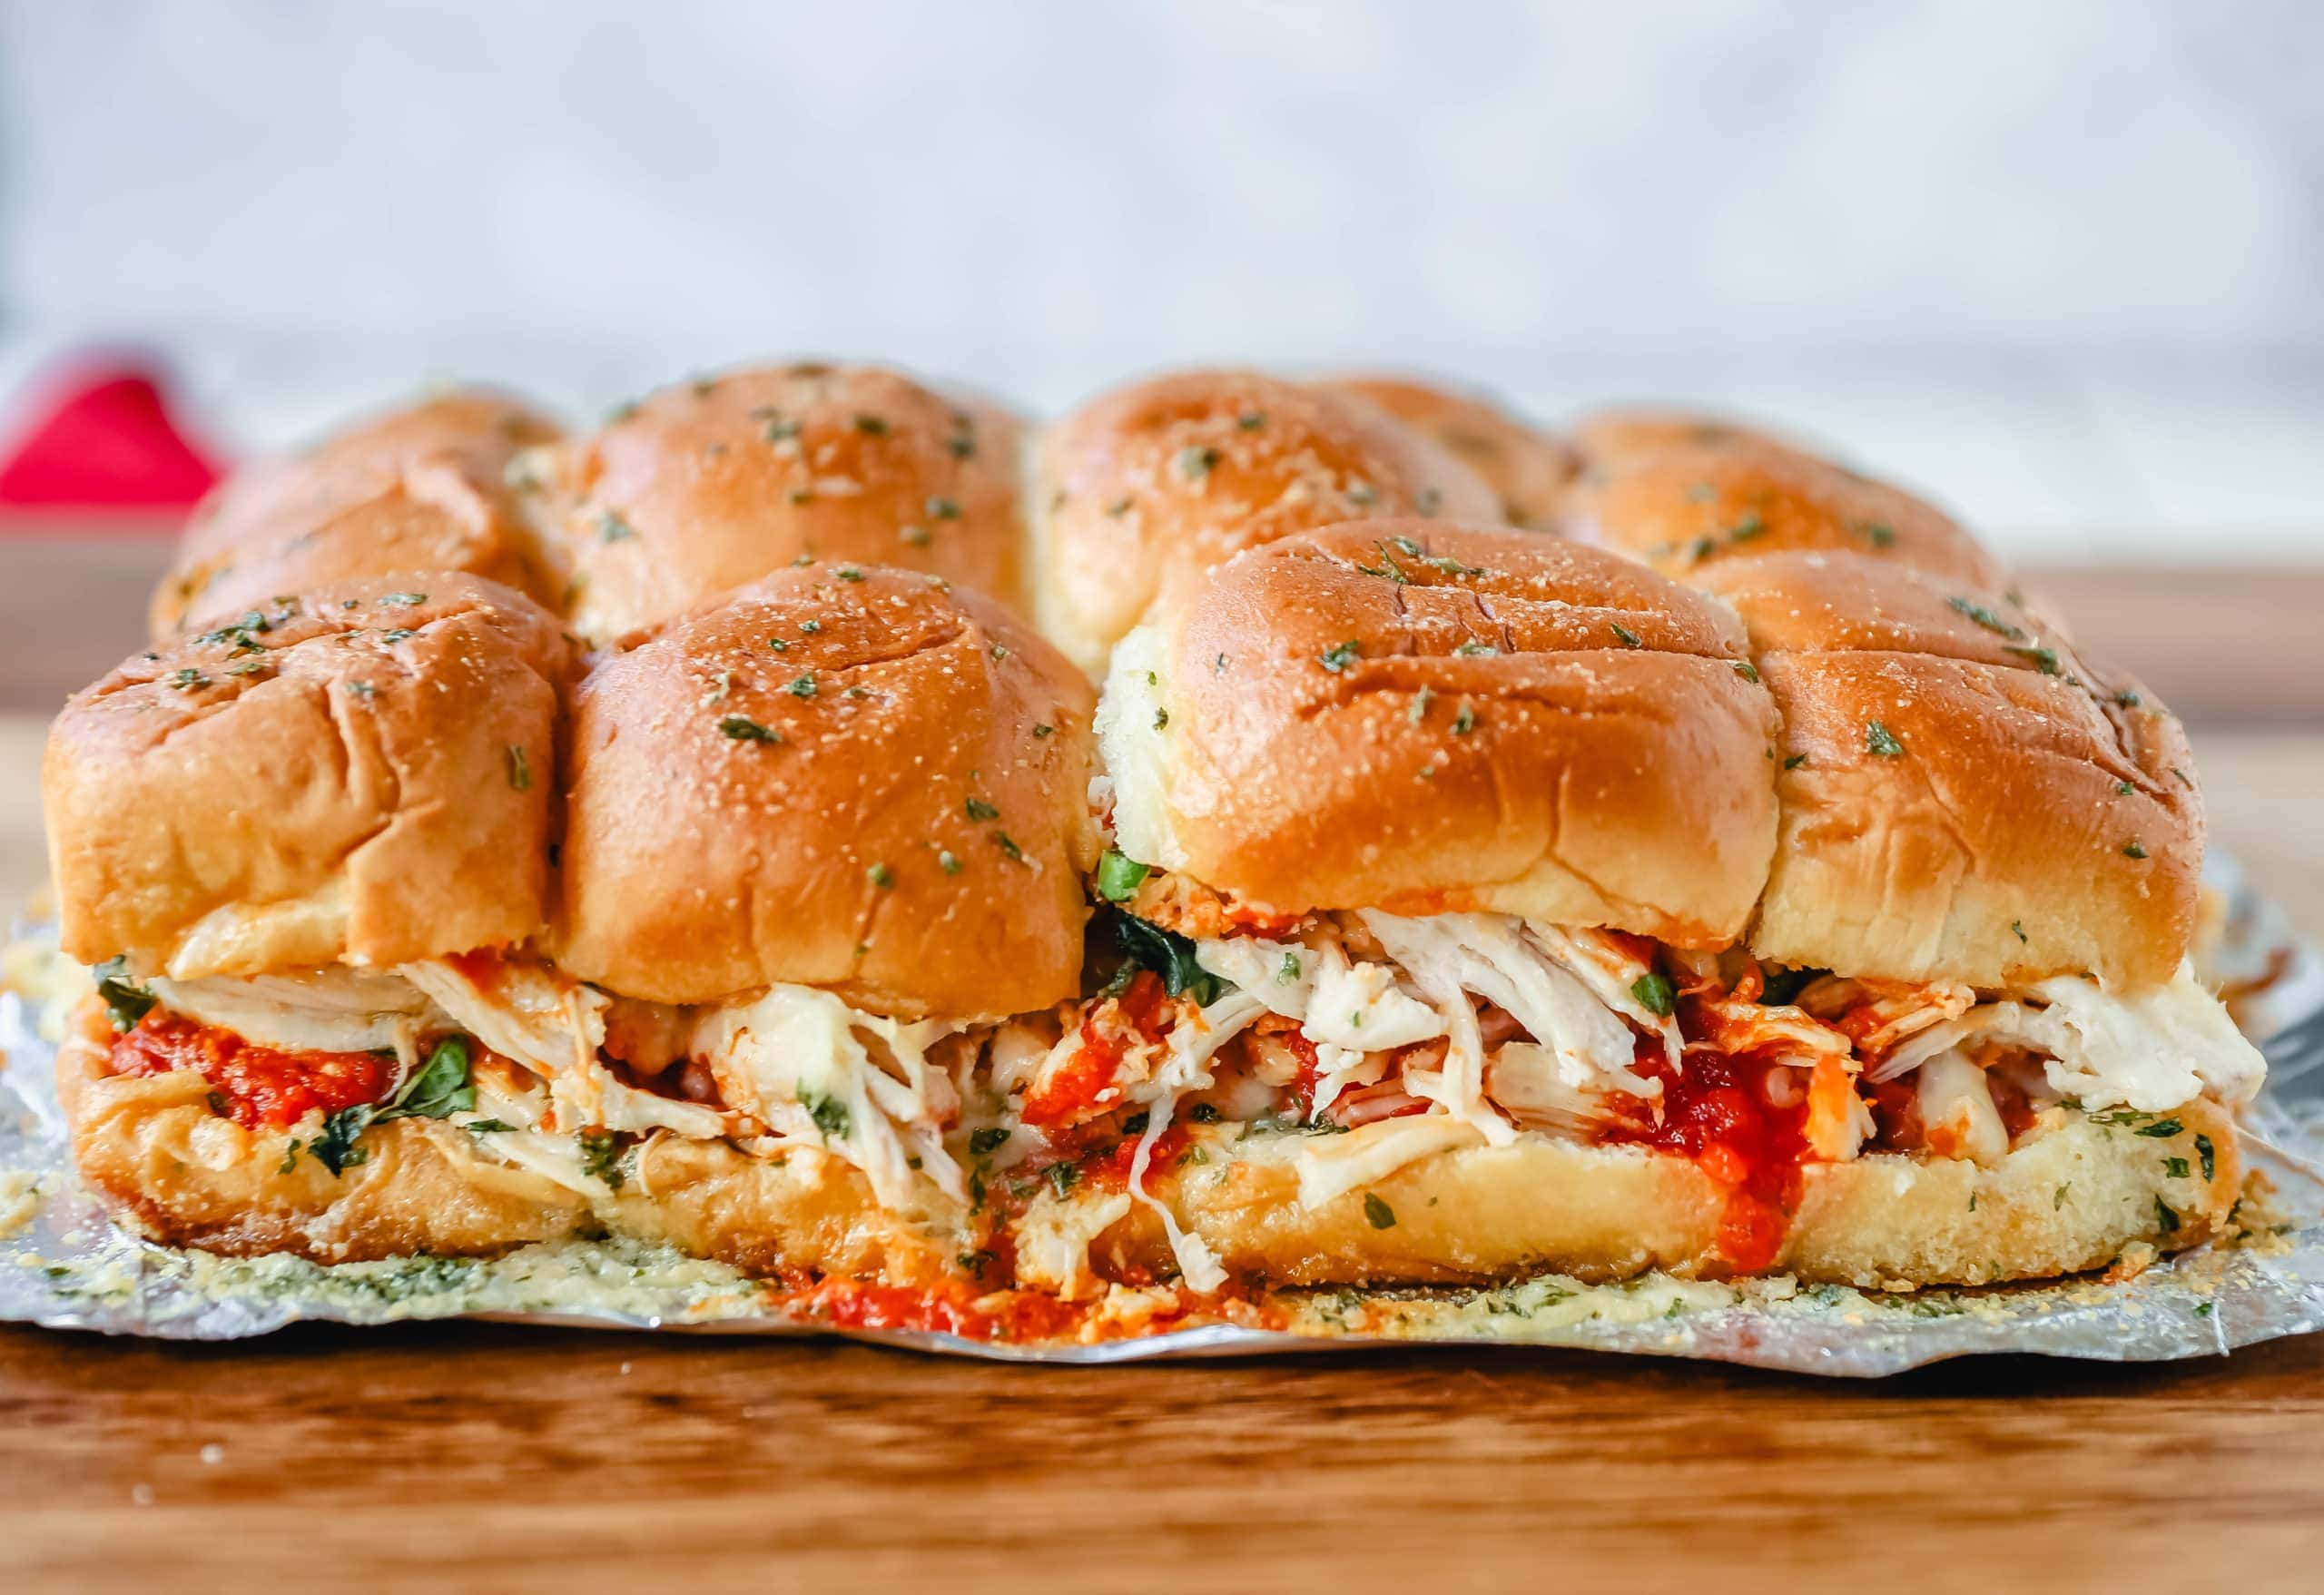 Baked Chicken Parm Sliders Chicken topped with a fresh marinara sauce topped with fresh mozzarella cheese and baked on Hawaiian sweet rolls and slathered with garlic butter. www.modernhoney.com #italian